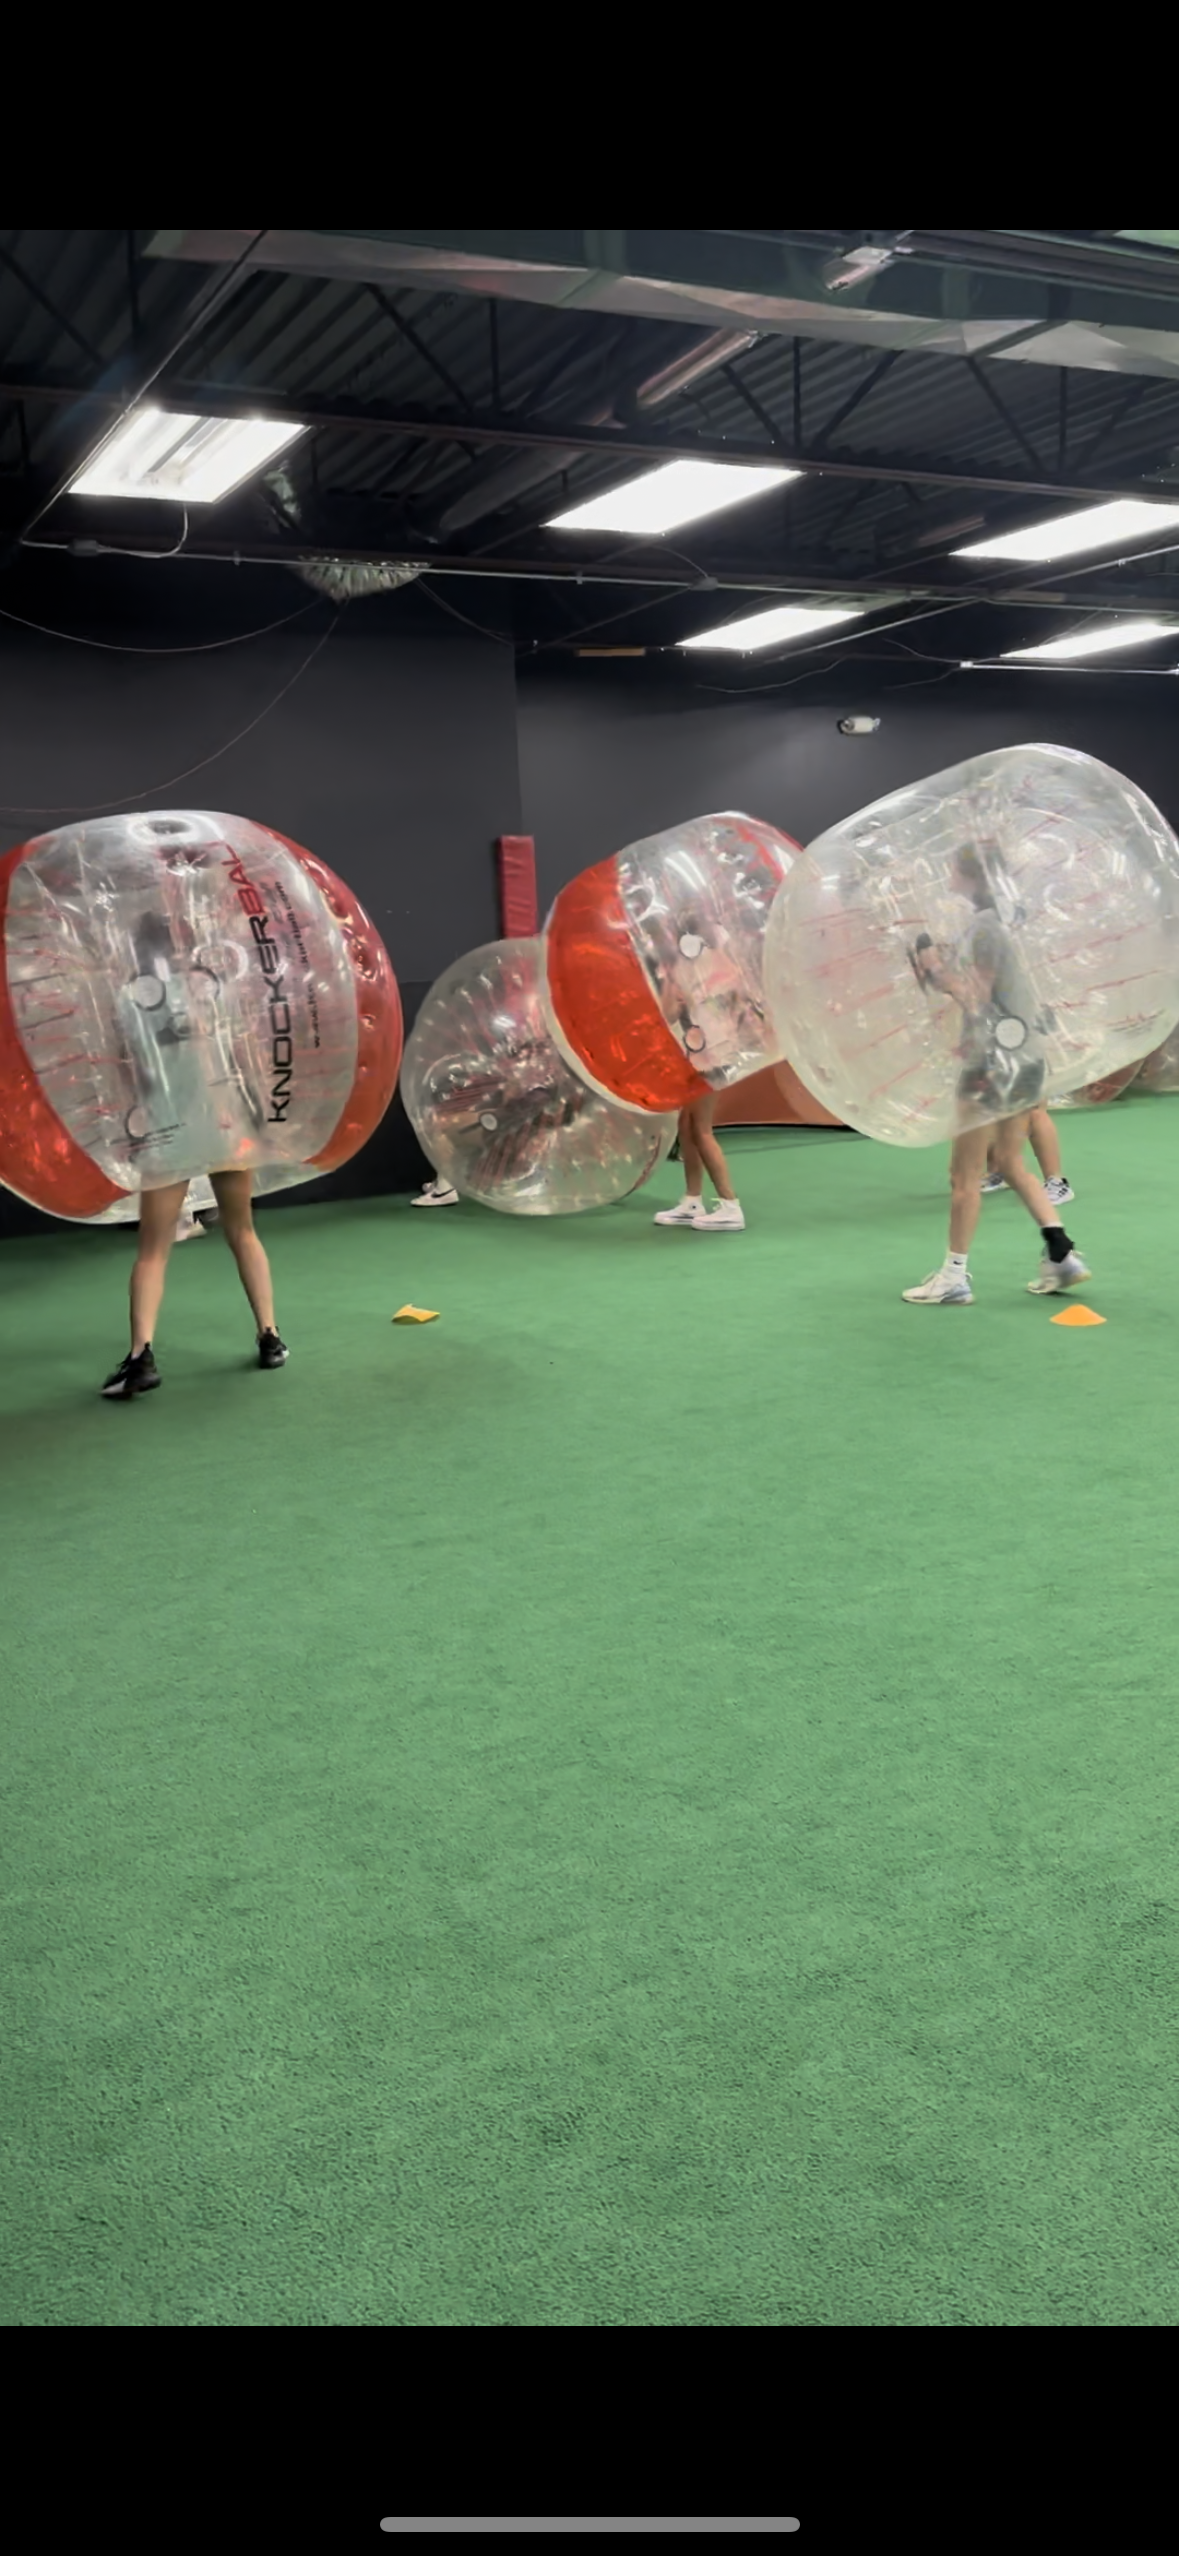 Up To 25 Knockerball Players 2 Hour Play Promo